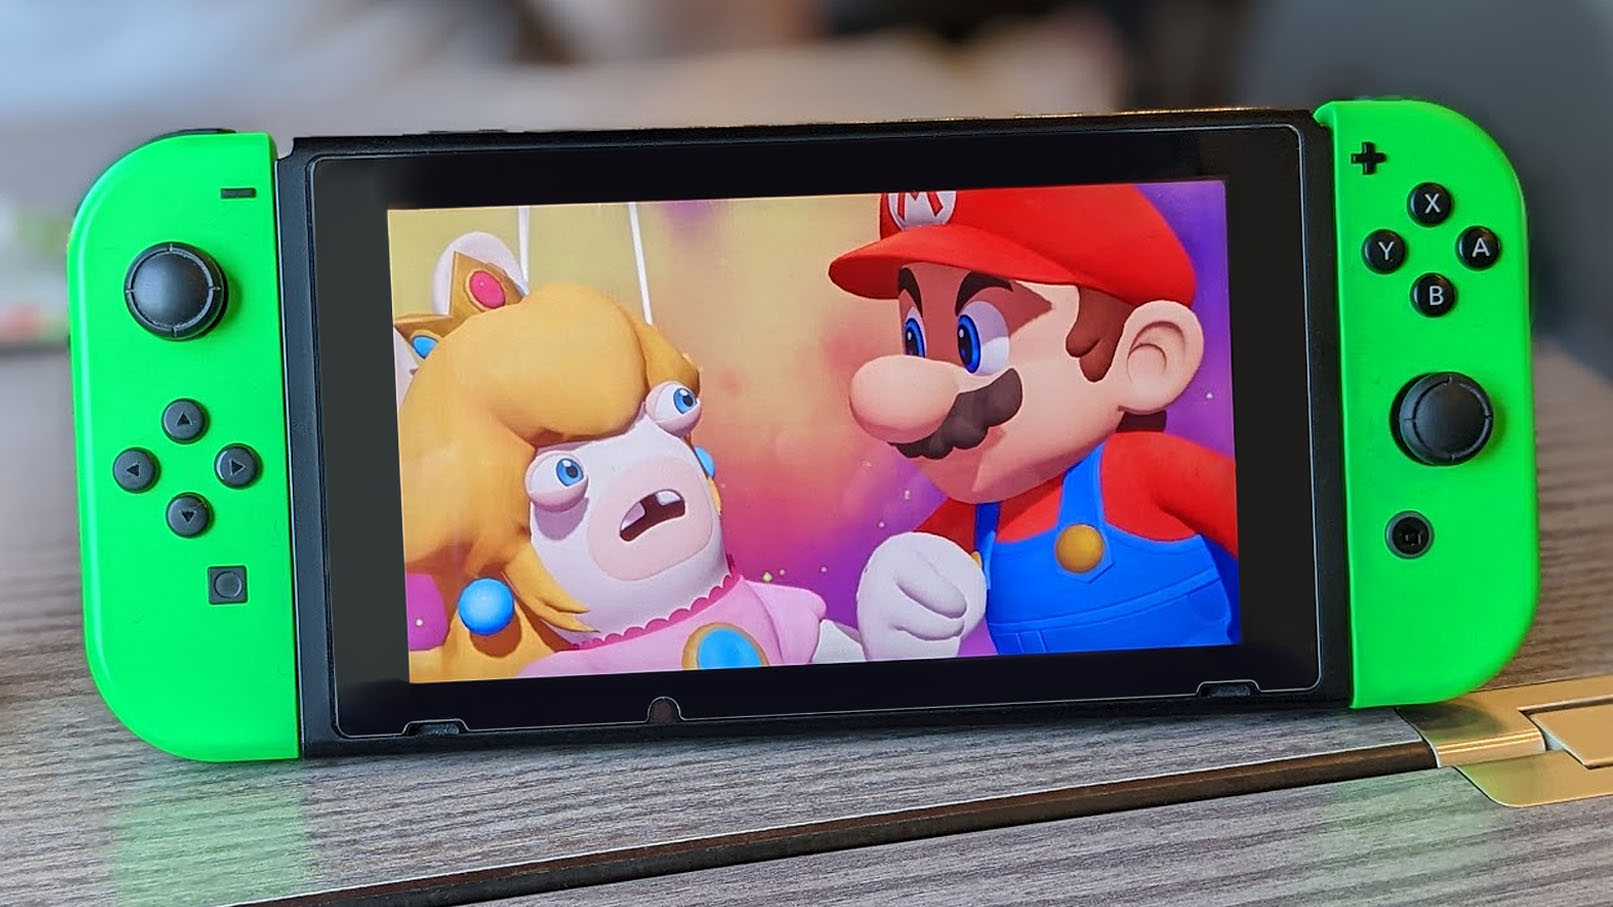 Mario's Next Nintendo Switch Game, Sparks of Hope, Gets a New